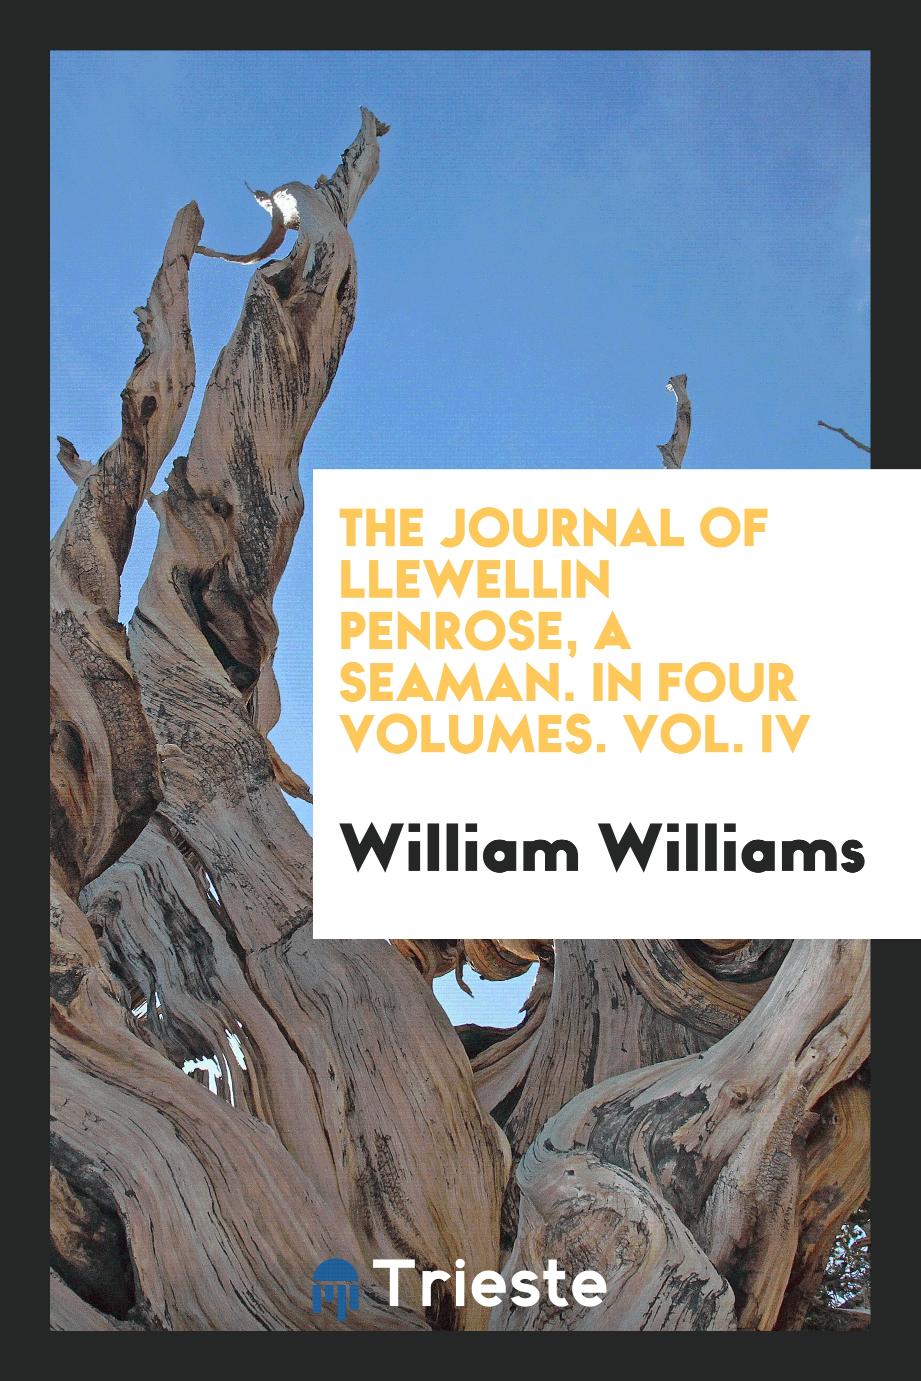 The journal of Llewellin Penrose, a seaman. In four volumes. Vol. IV